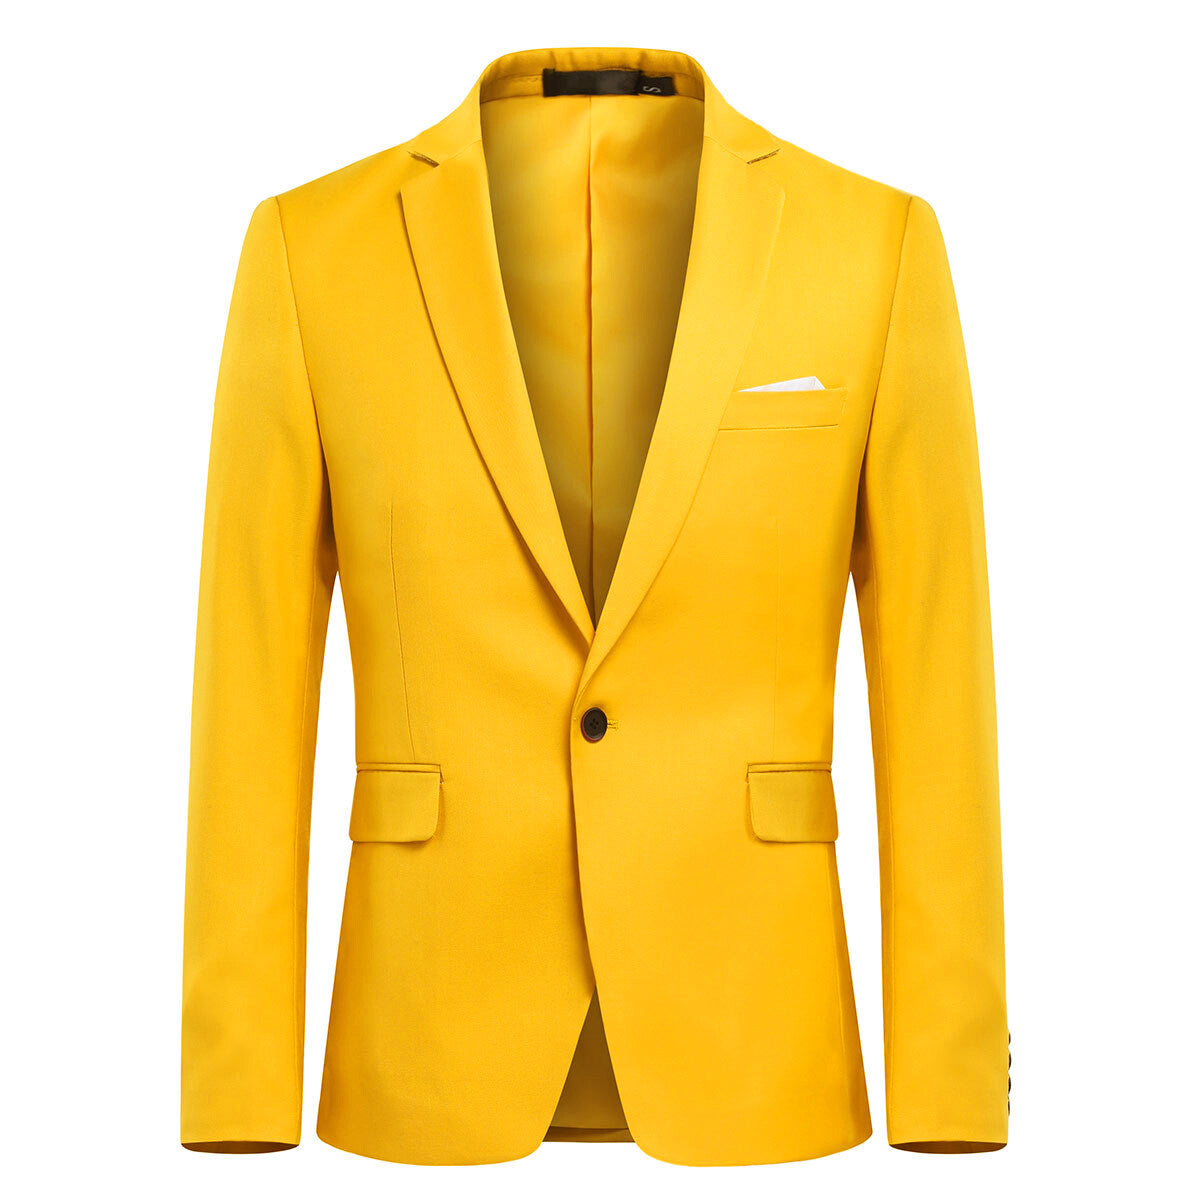 3-Piece Slim Fit Solid Color Jacket Smart Wedding Formal Suit Yellow